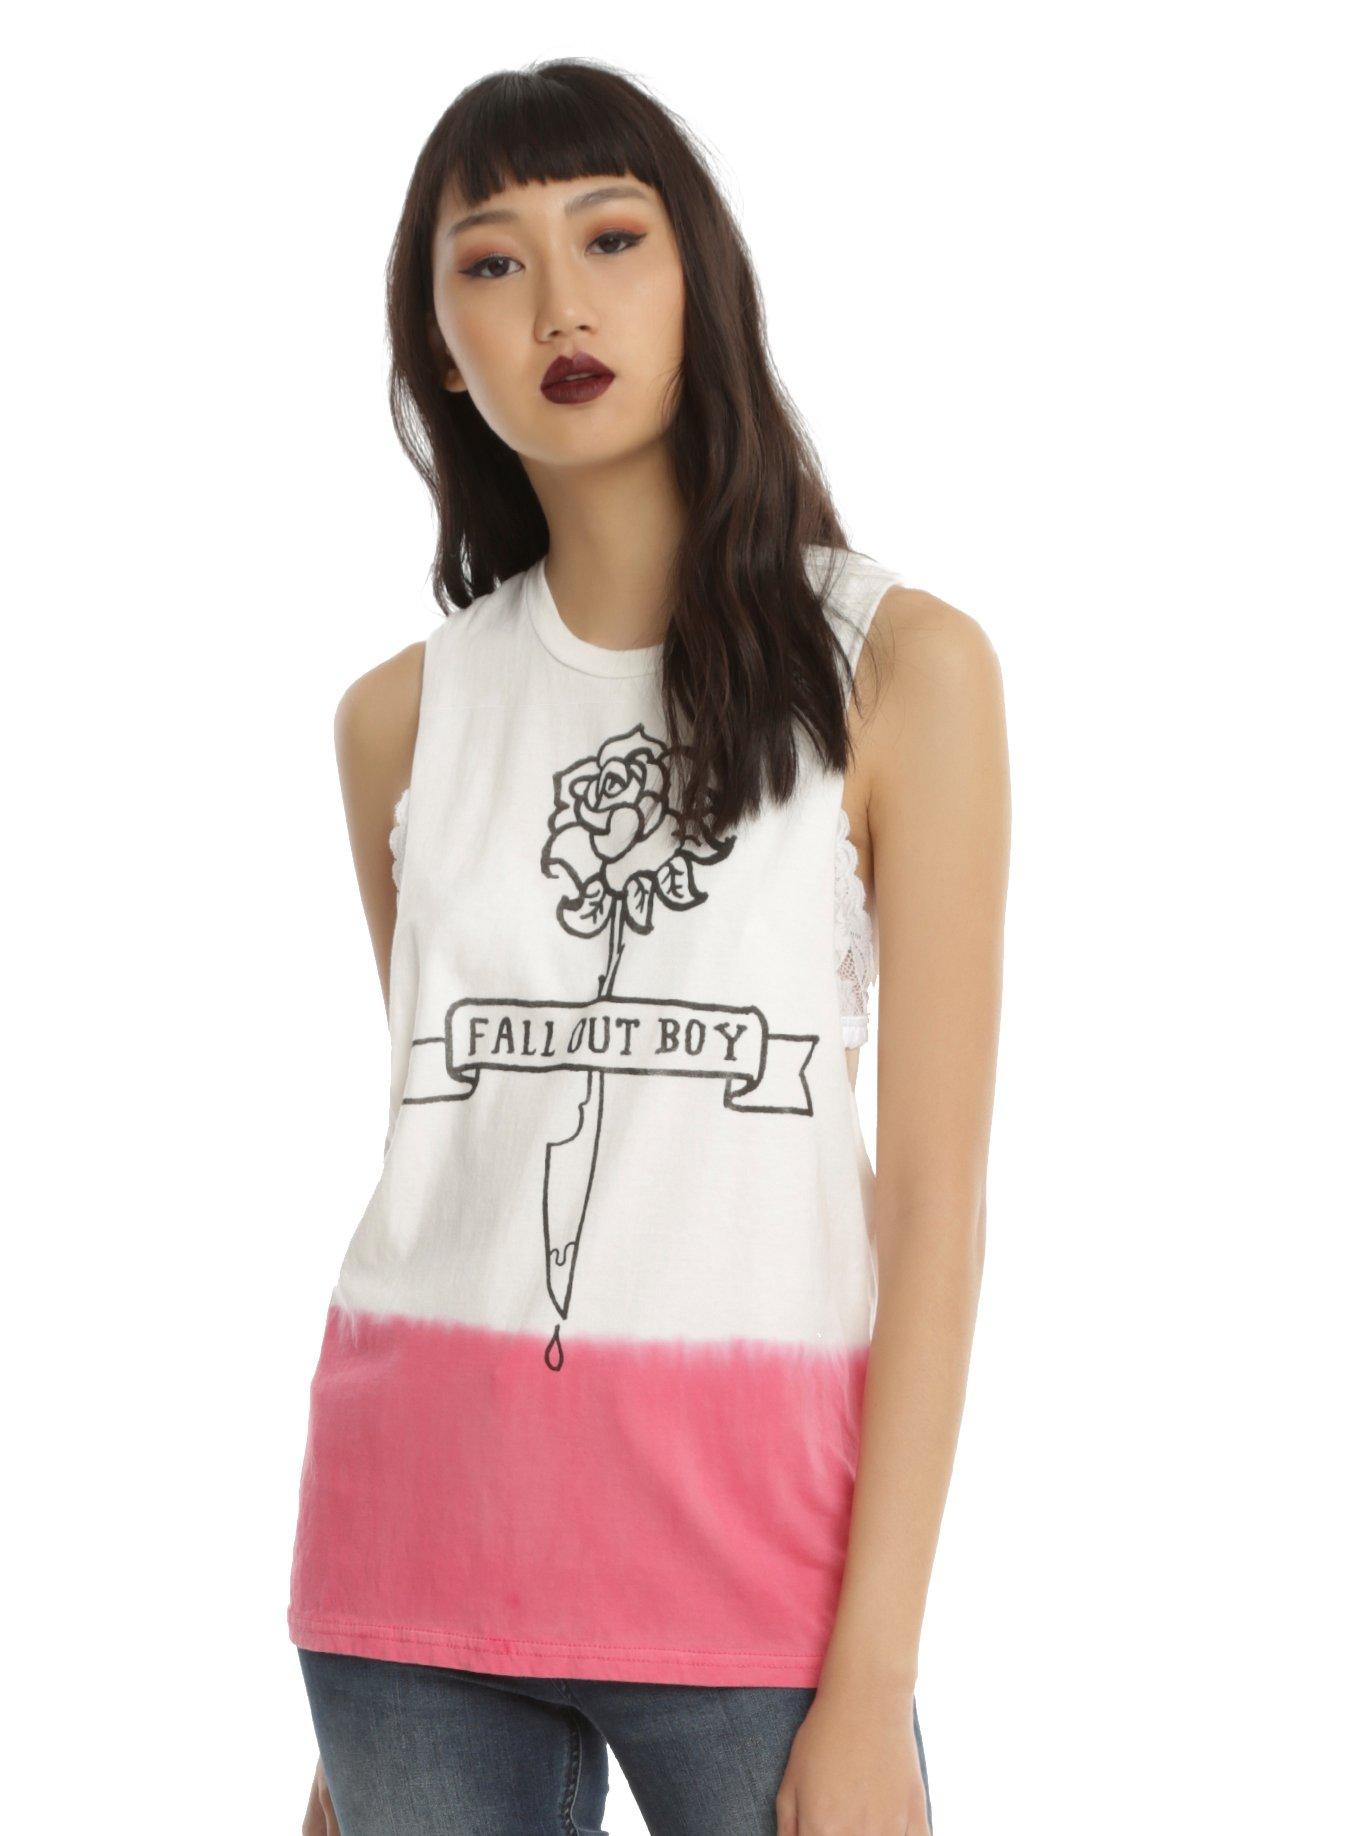 Fall Out Boy American Psycho Tie Dye Girls Muscle Top, WHITE, hi-res